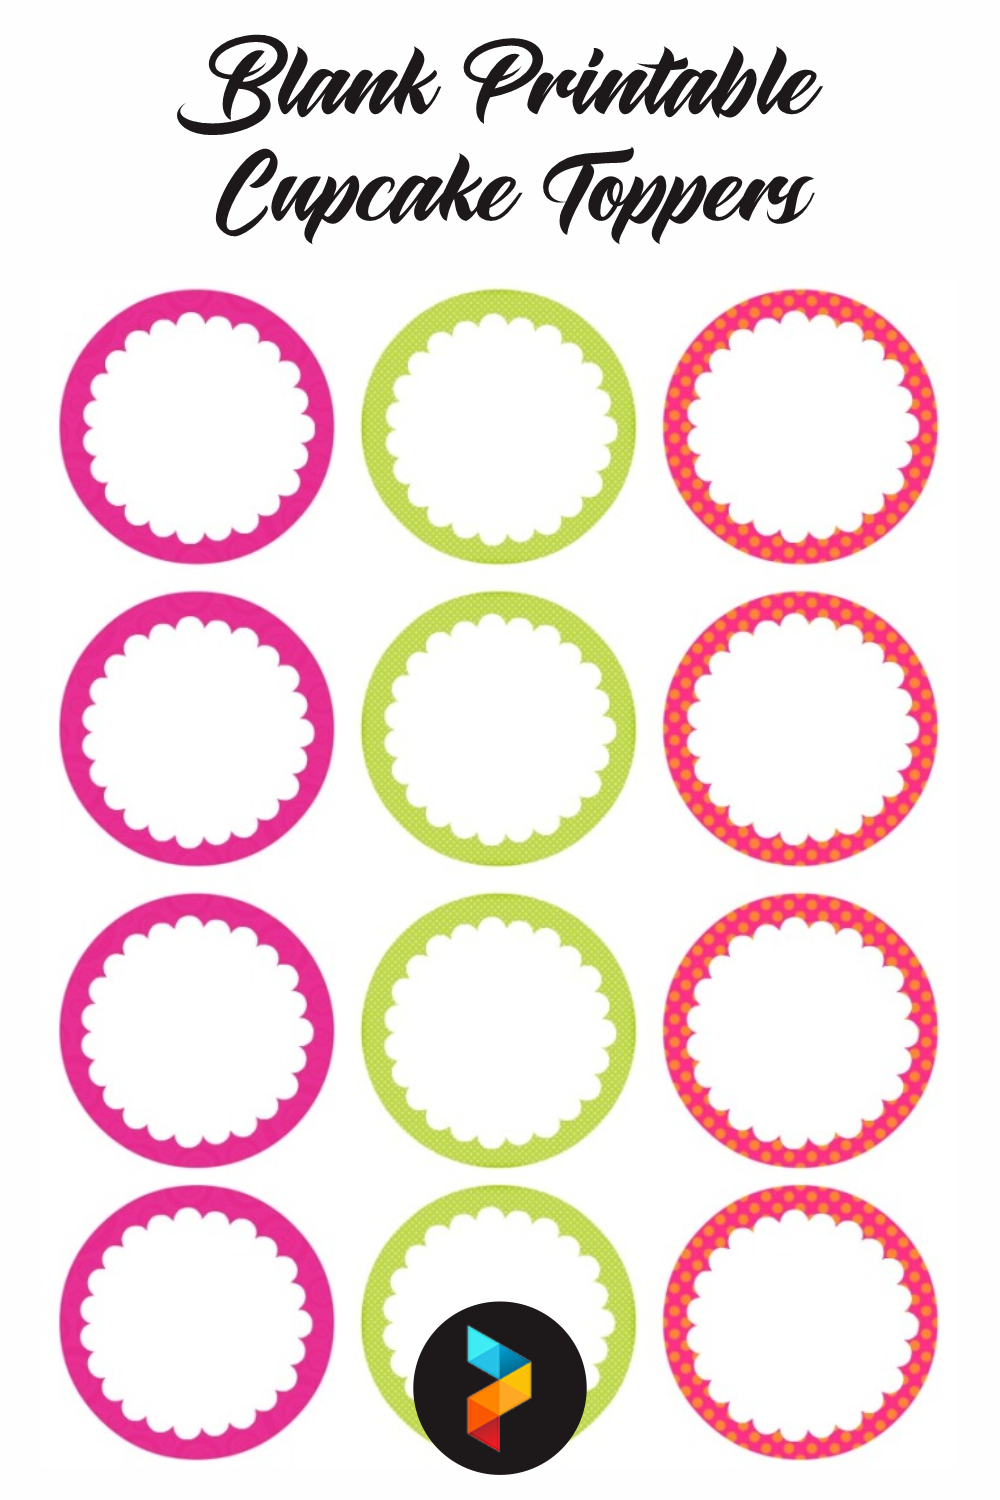 Blank Printable Cupcake Toppers pertaining to Cupcake Topper Templates Free Printable